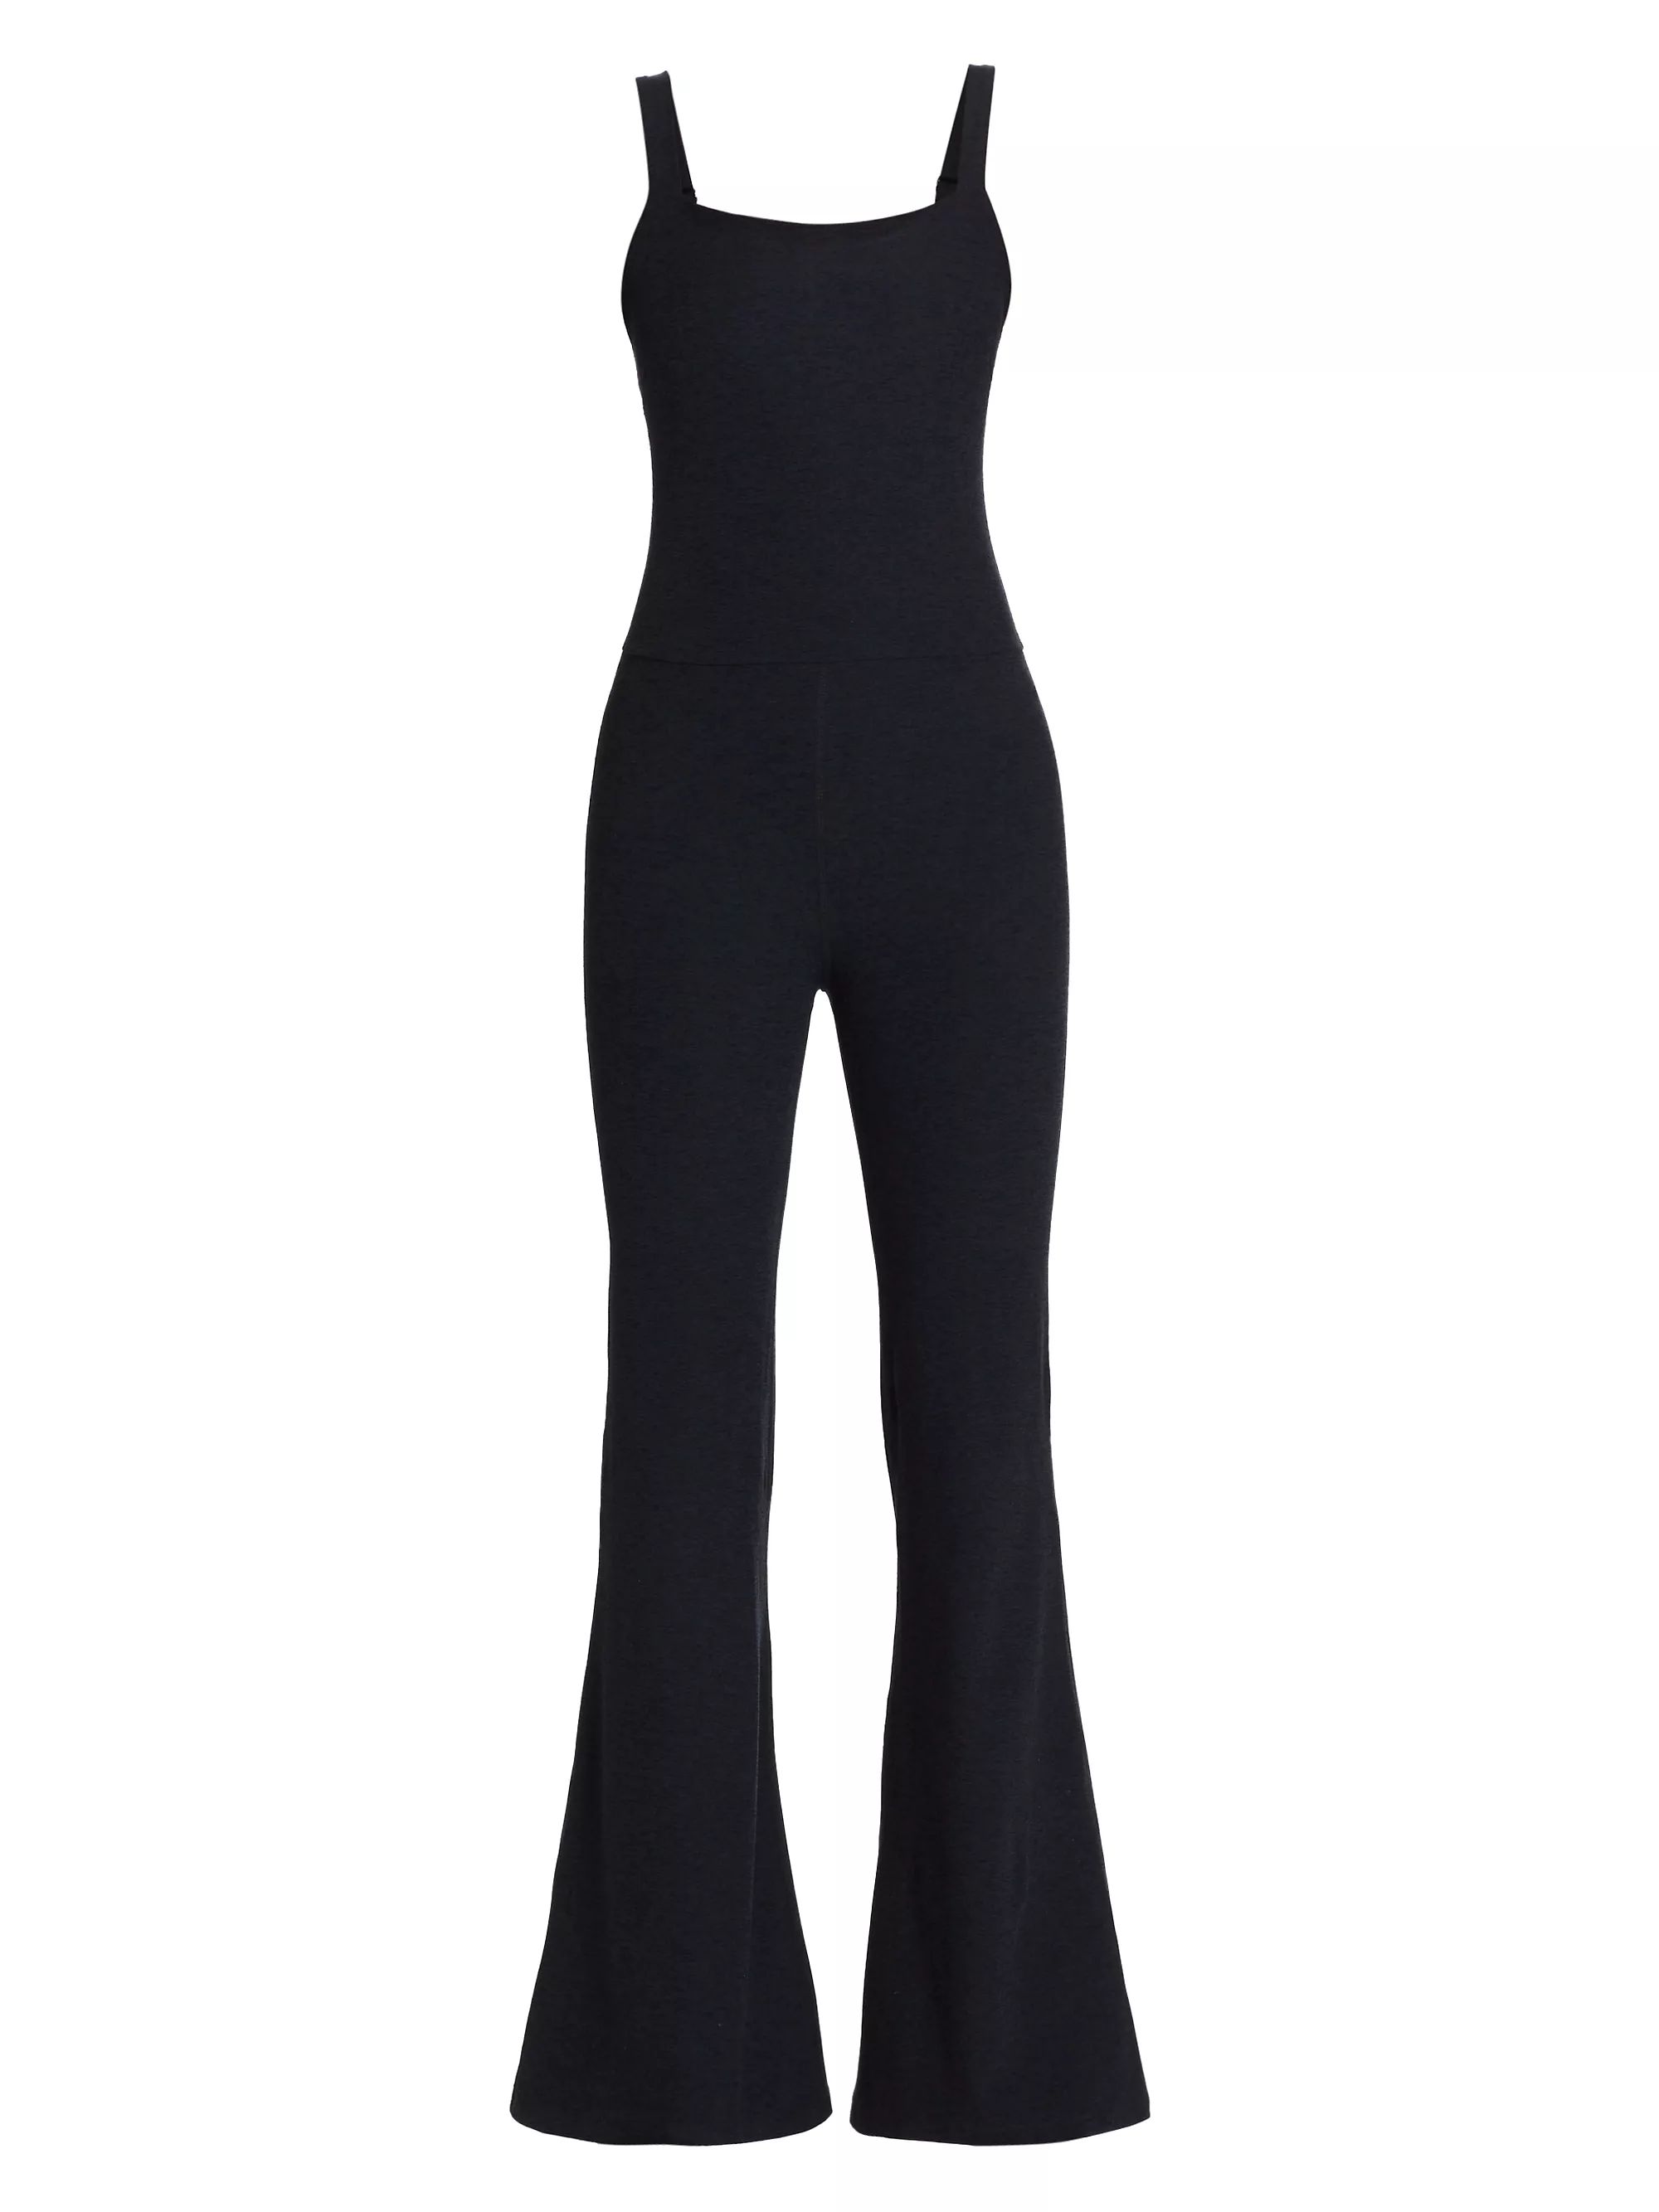 Beyond YogaHit The Scene JumpsuitRating: 5 out of 5 stars79 | Saks Fifth Avenue